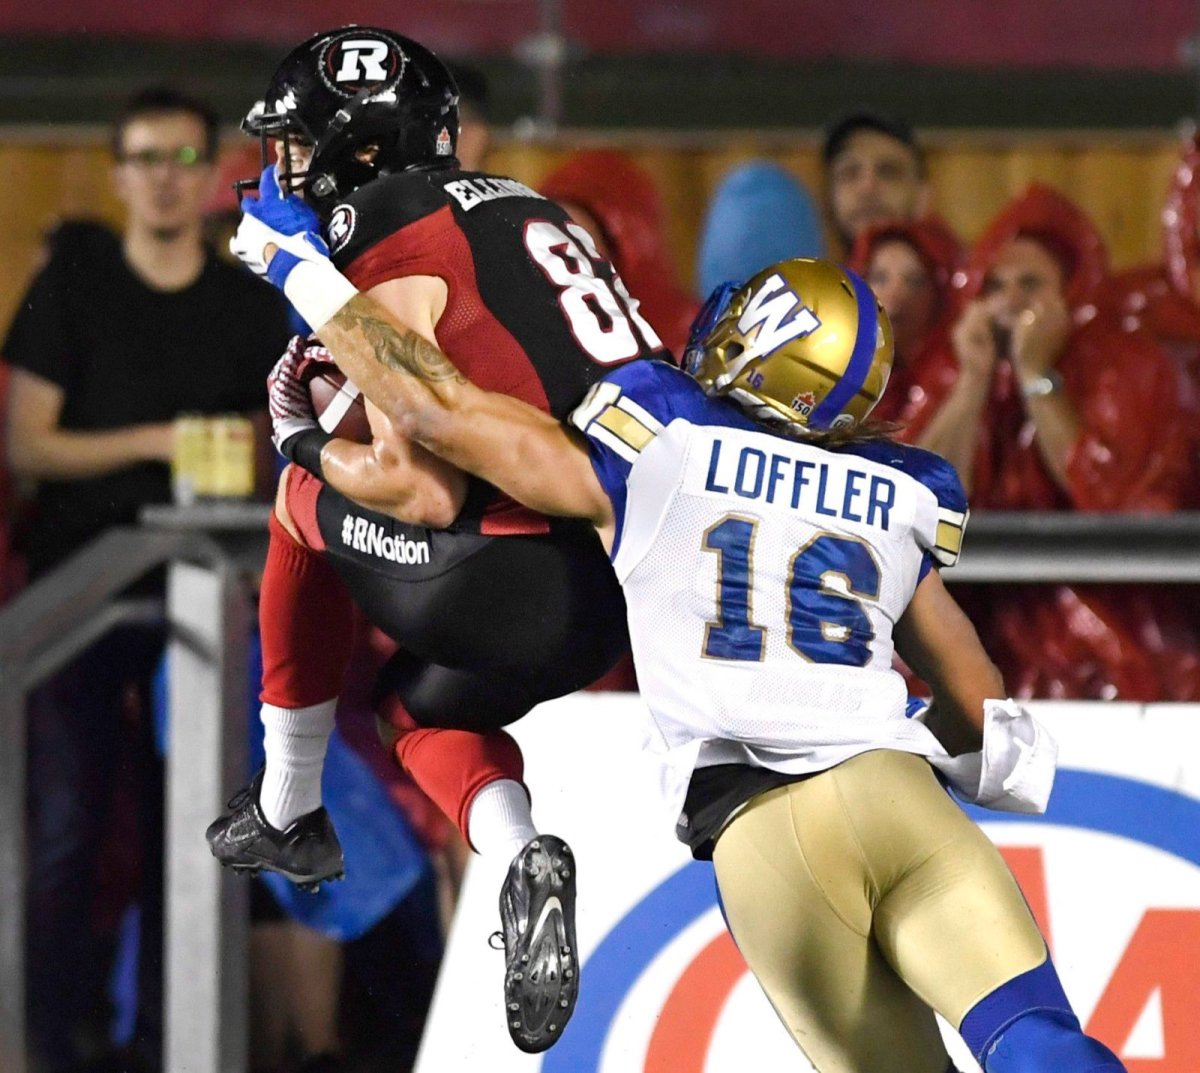 Ottawa Redblacks' Brad Sinopoli (88)catches the ball for a touchdown as Winnipeg Blue Bombers' Taylor Loffler (16) defends during second half of a CFL football game in Ottawa on Friday, Aug. 4, 2017. THE CANADIAN PRESS/Justin Tang.